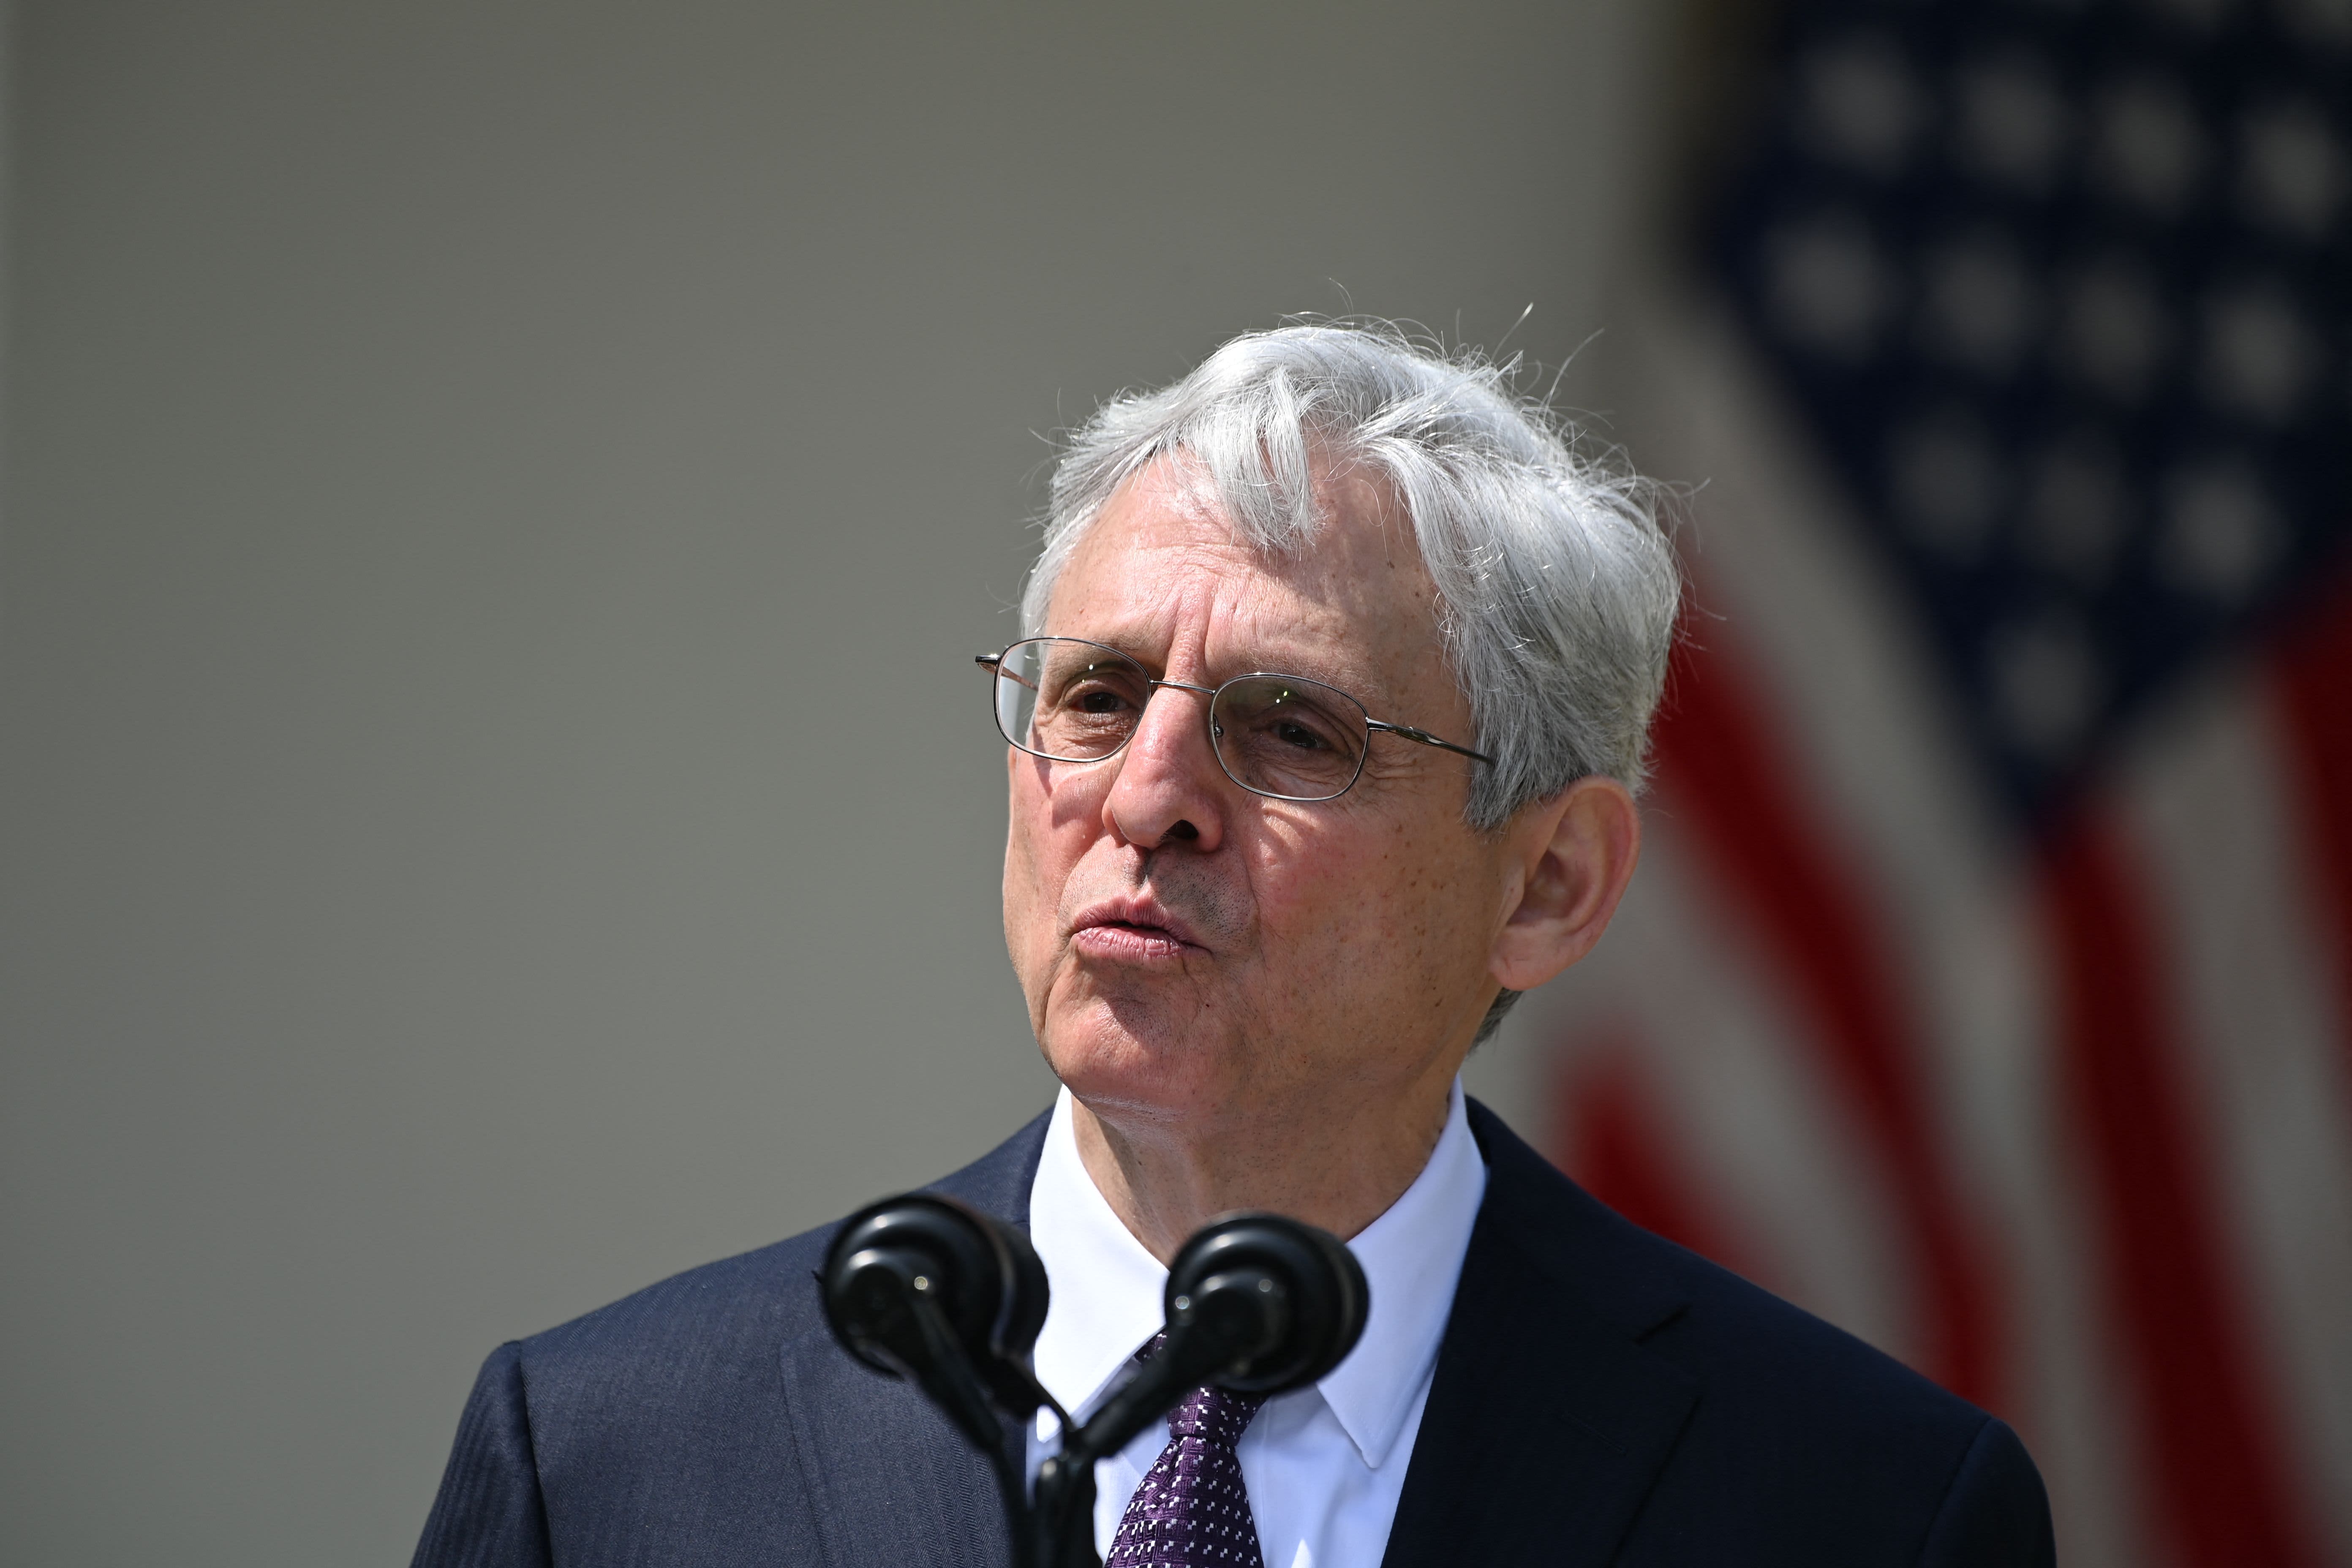 AG Merrick Garland to scrap Trump limits on police consent decisions